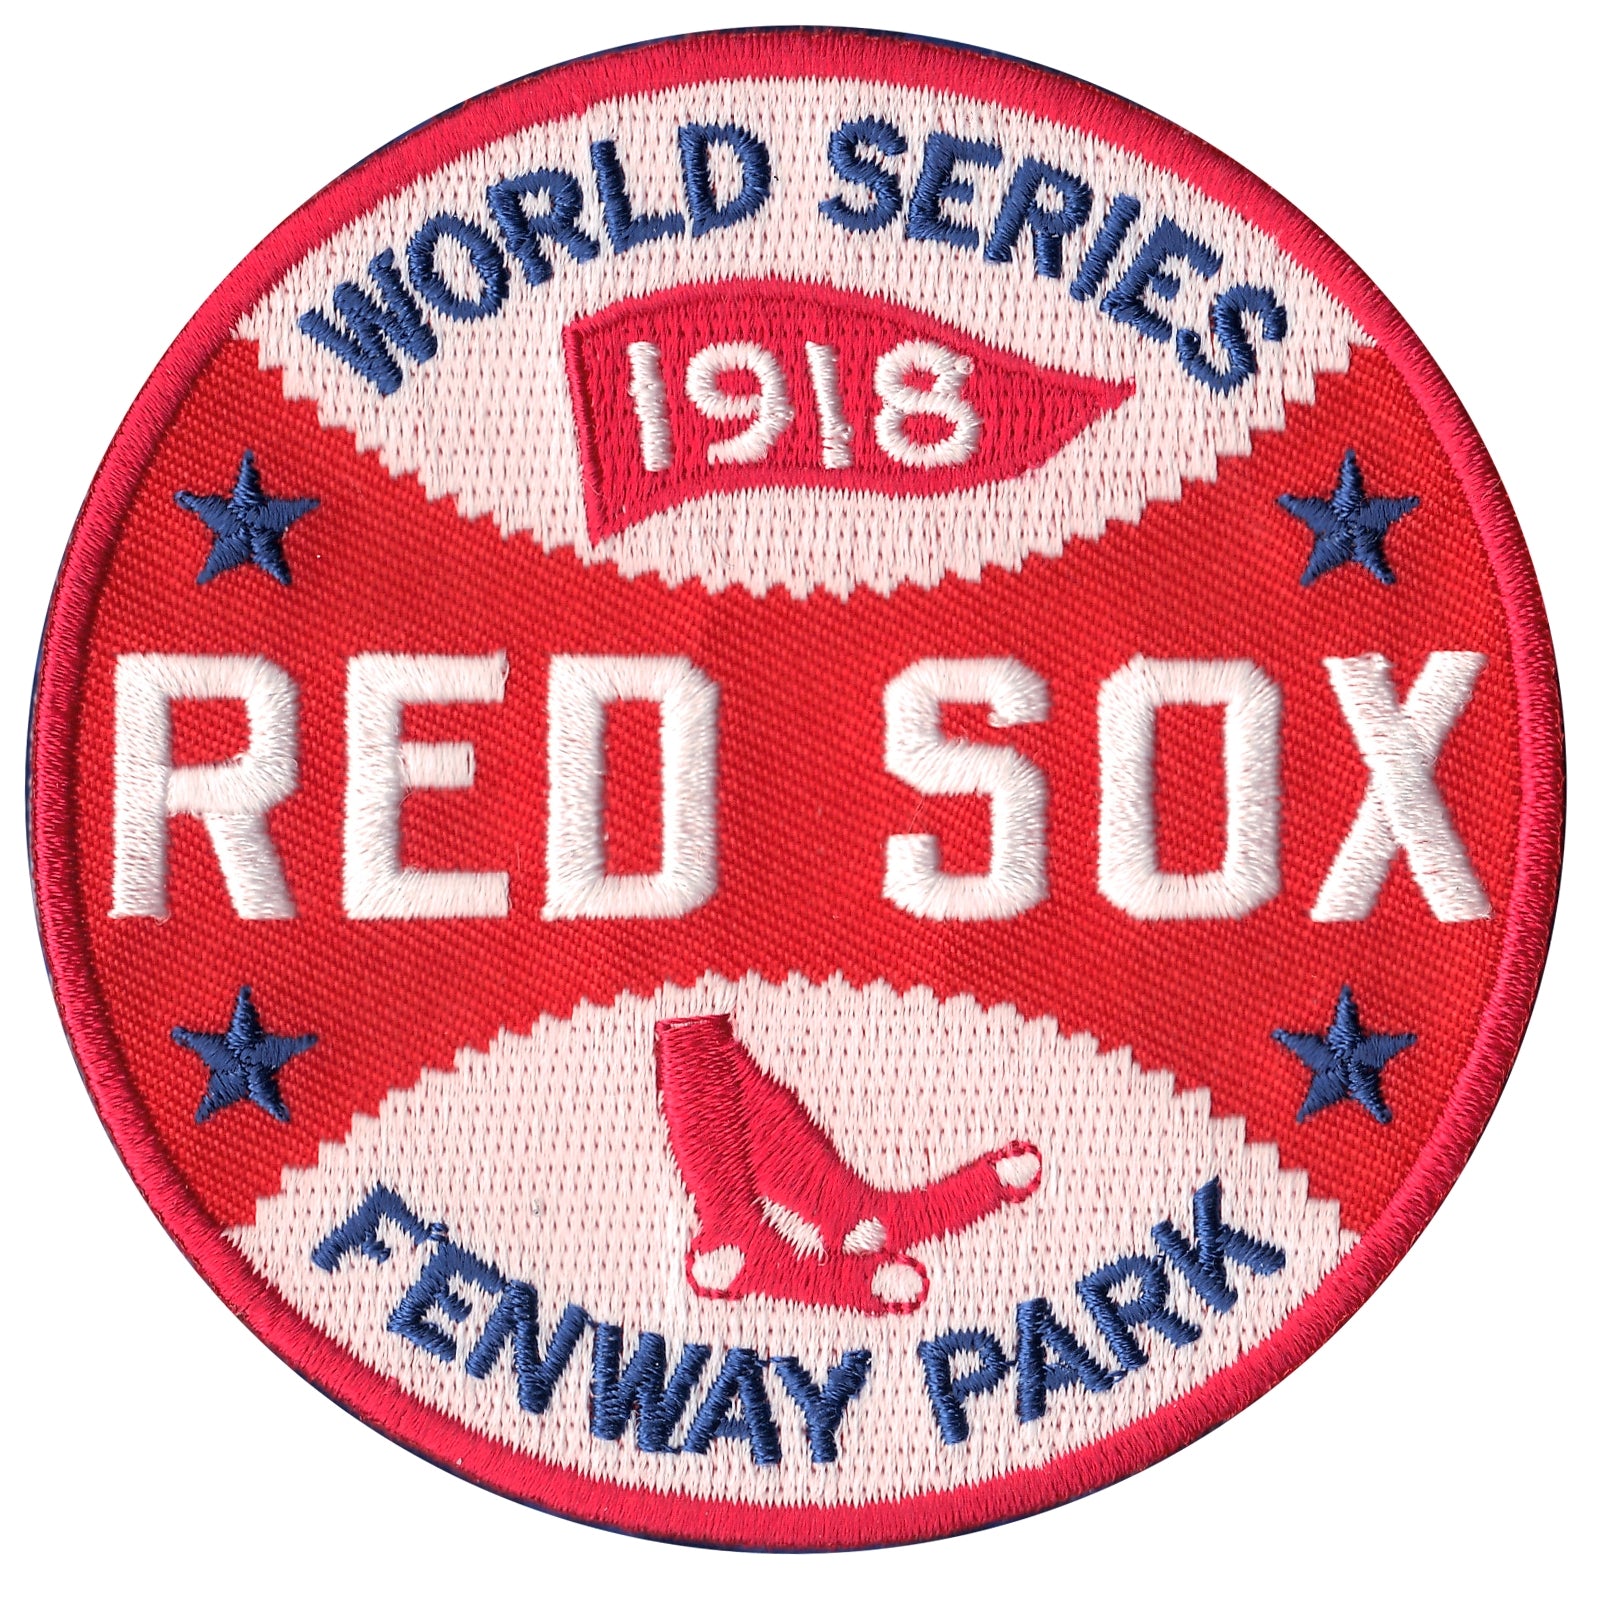 2 patch on red sox uniform